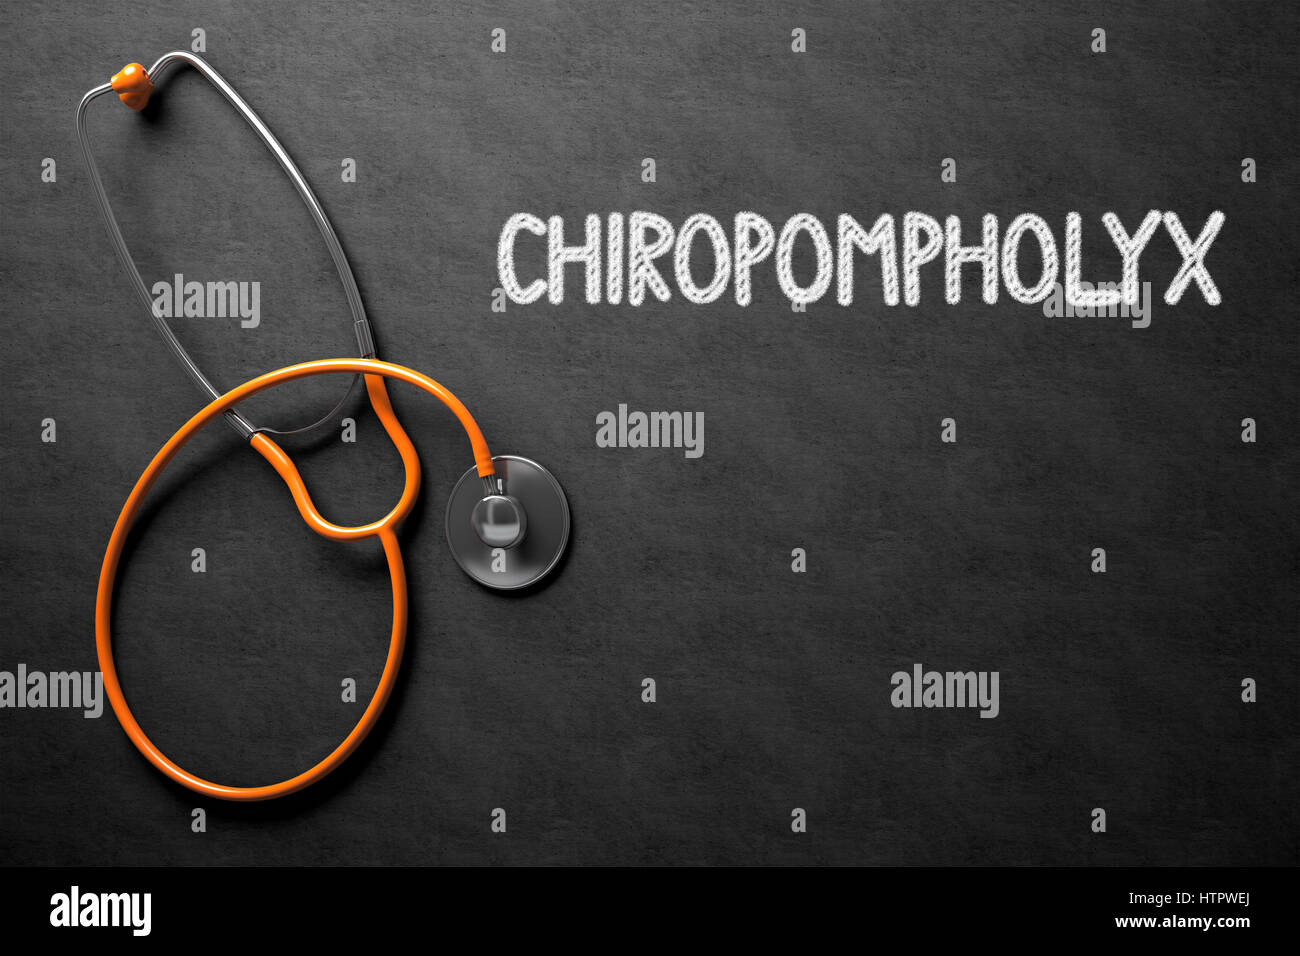 Chiropompholyx Concept on Chalkboard. 3D Illustration. Stock Photo